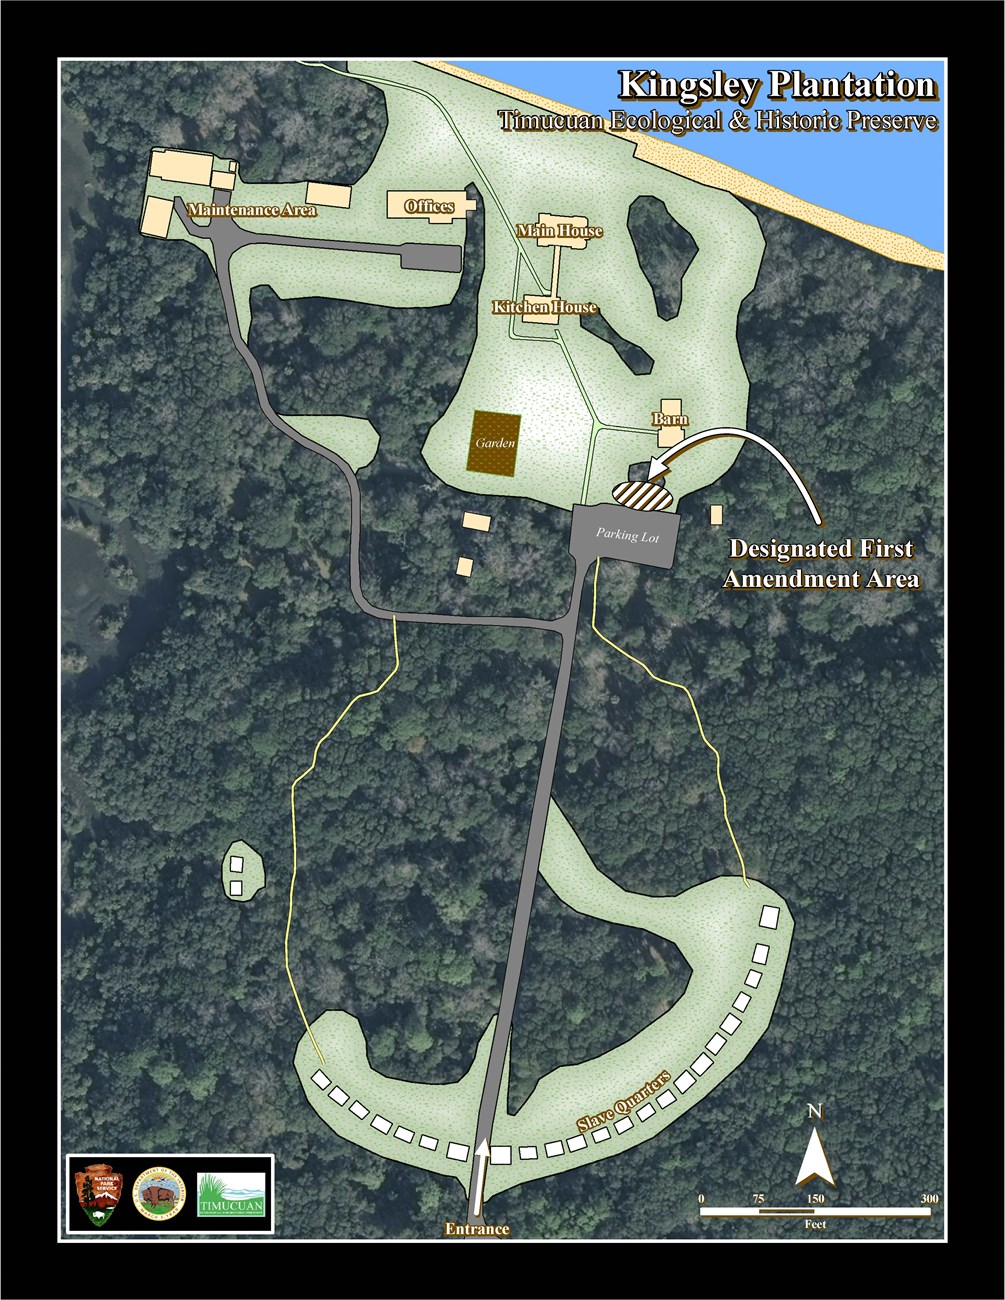 map of Kingsley Plantation designating a free speech area just north of the parking lot.